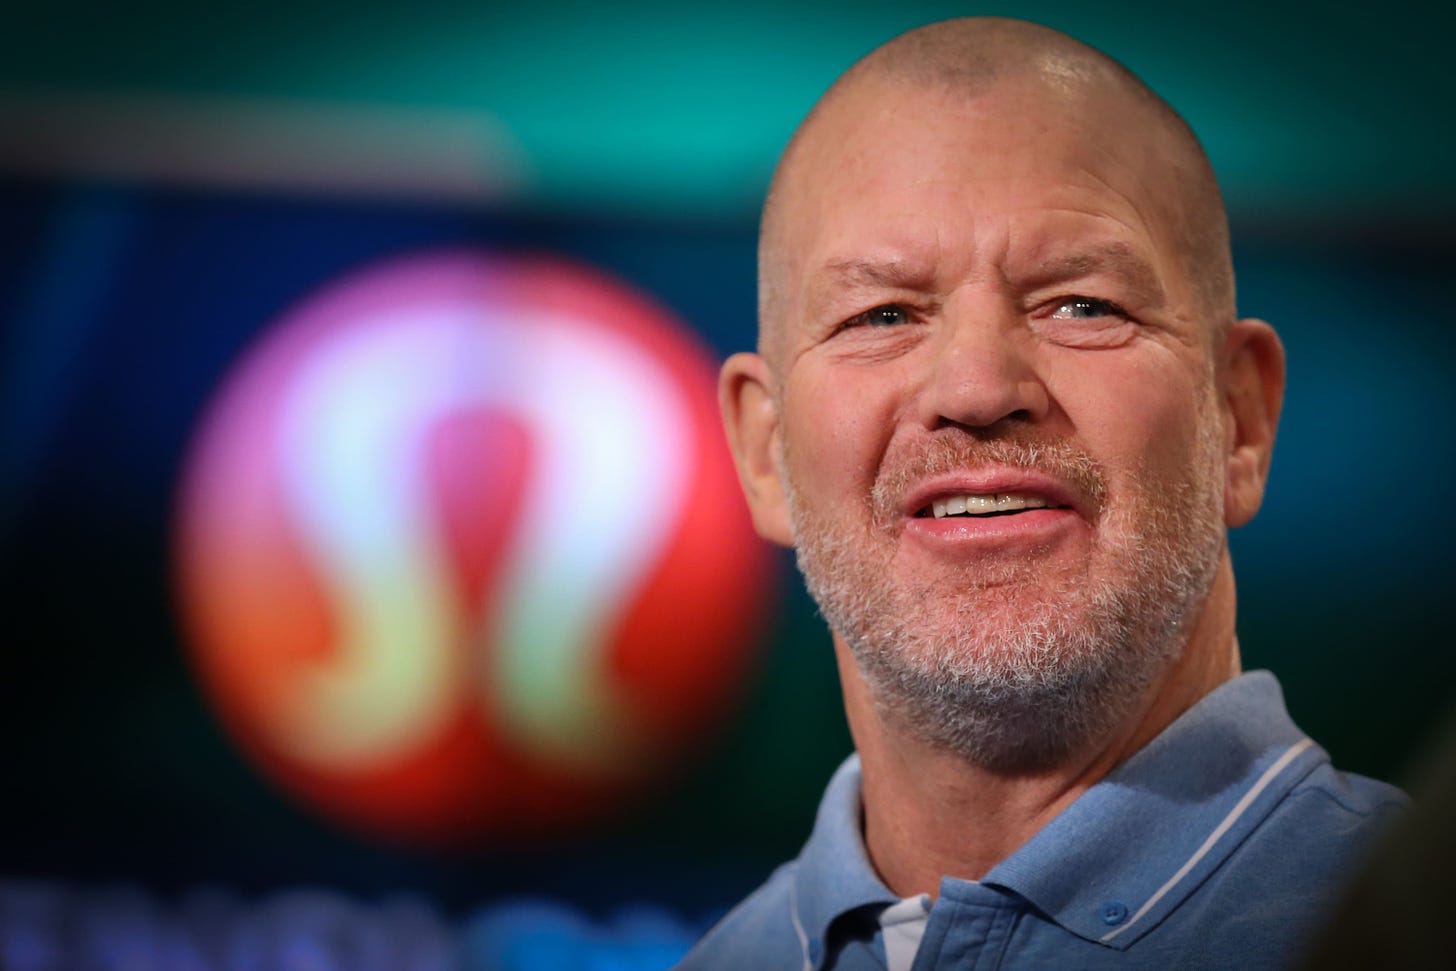 Lululemon founder Chip Wilson: Under Armour 'lost it many years ago'